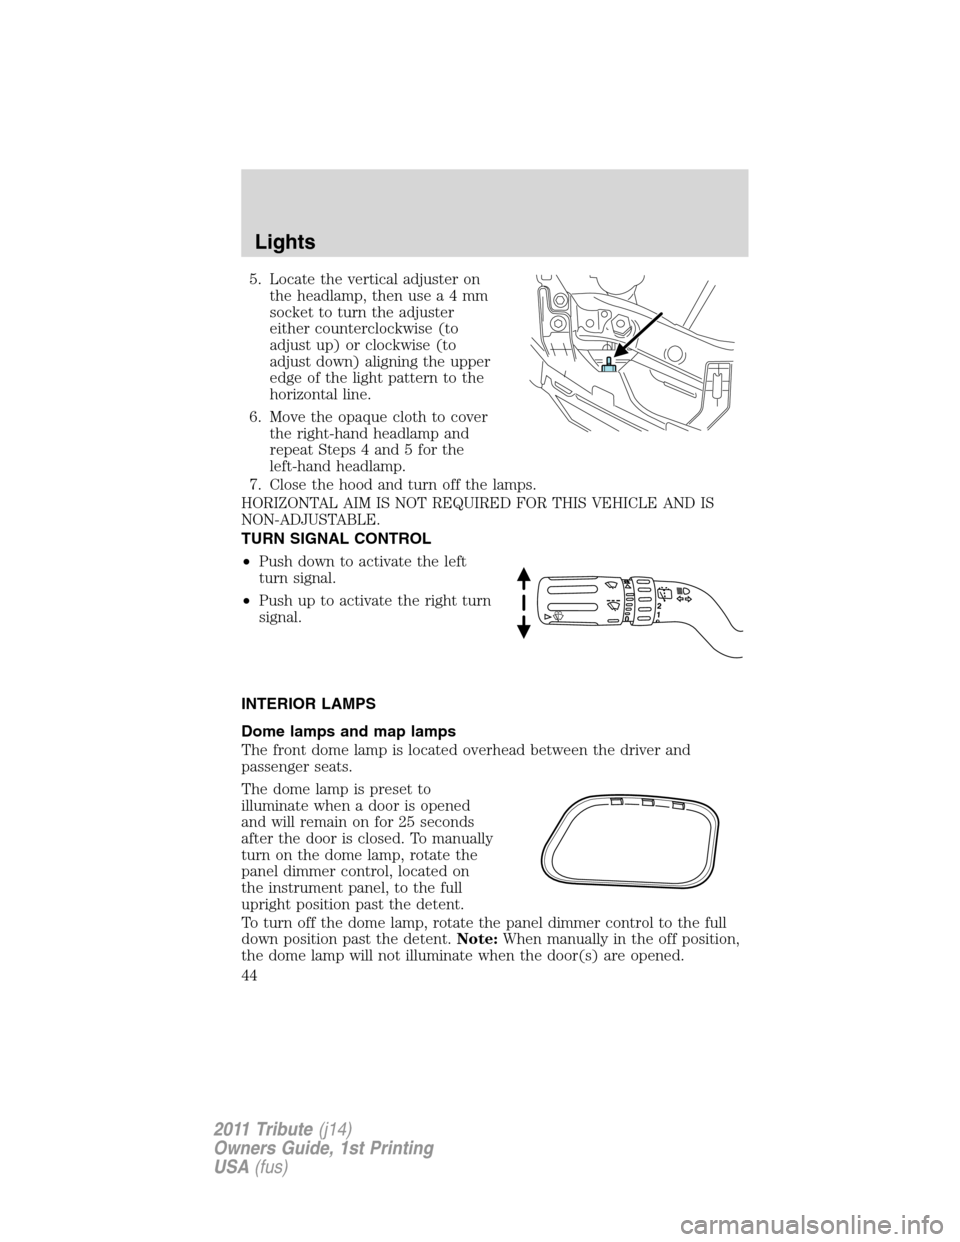 MAZDA MODEL TRIBUTE 2011  Owners Manual (in English) 5. Locate the vertical adjuster on
the headlamp, then usea4mm
socket to turn the adjuster
either counterclockwise (to
adjust up) or clockwise (to
adjust down) aligning the upper
edge of the light patt